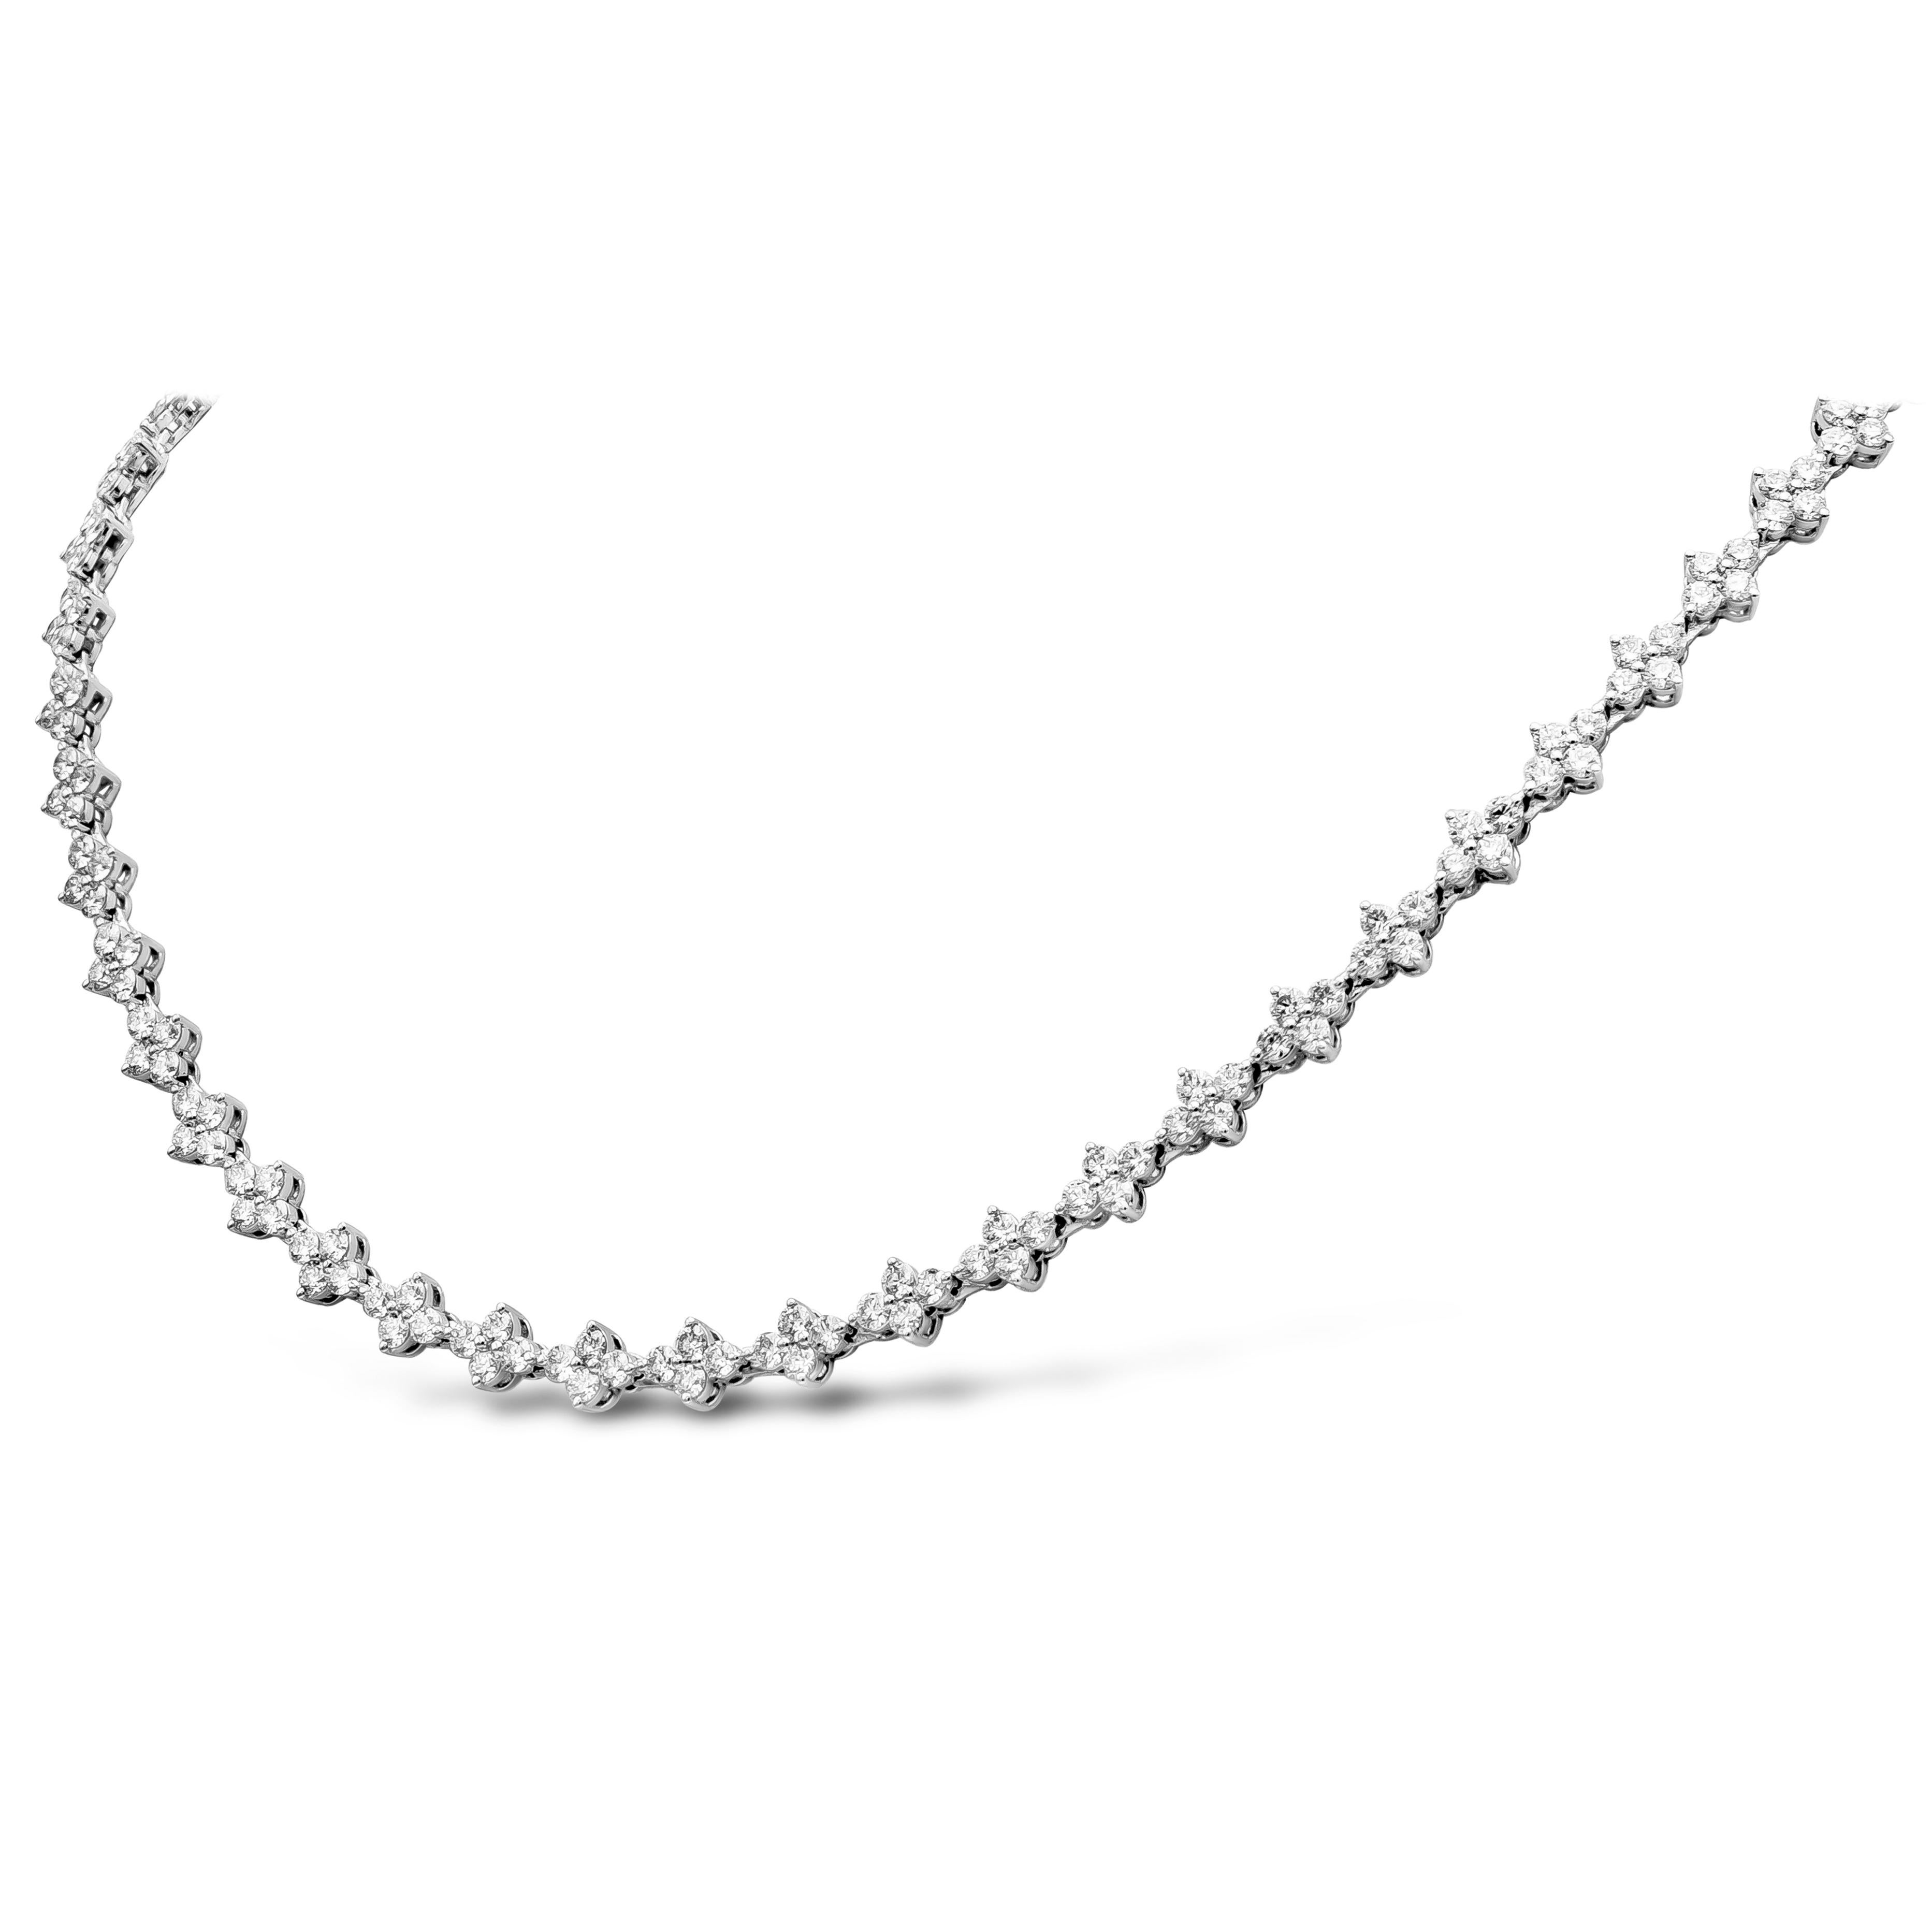 A magnificent tennis necklace showcasing round brilliant diamonds clustered in groups of 4. Necklace has 216 stone weighing 9.59 carats, F+ Color and VS-SI in Clarity. 16 inches in length and made in 18k White Gold.

Style available in different